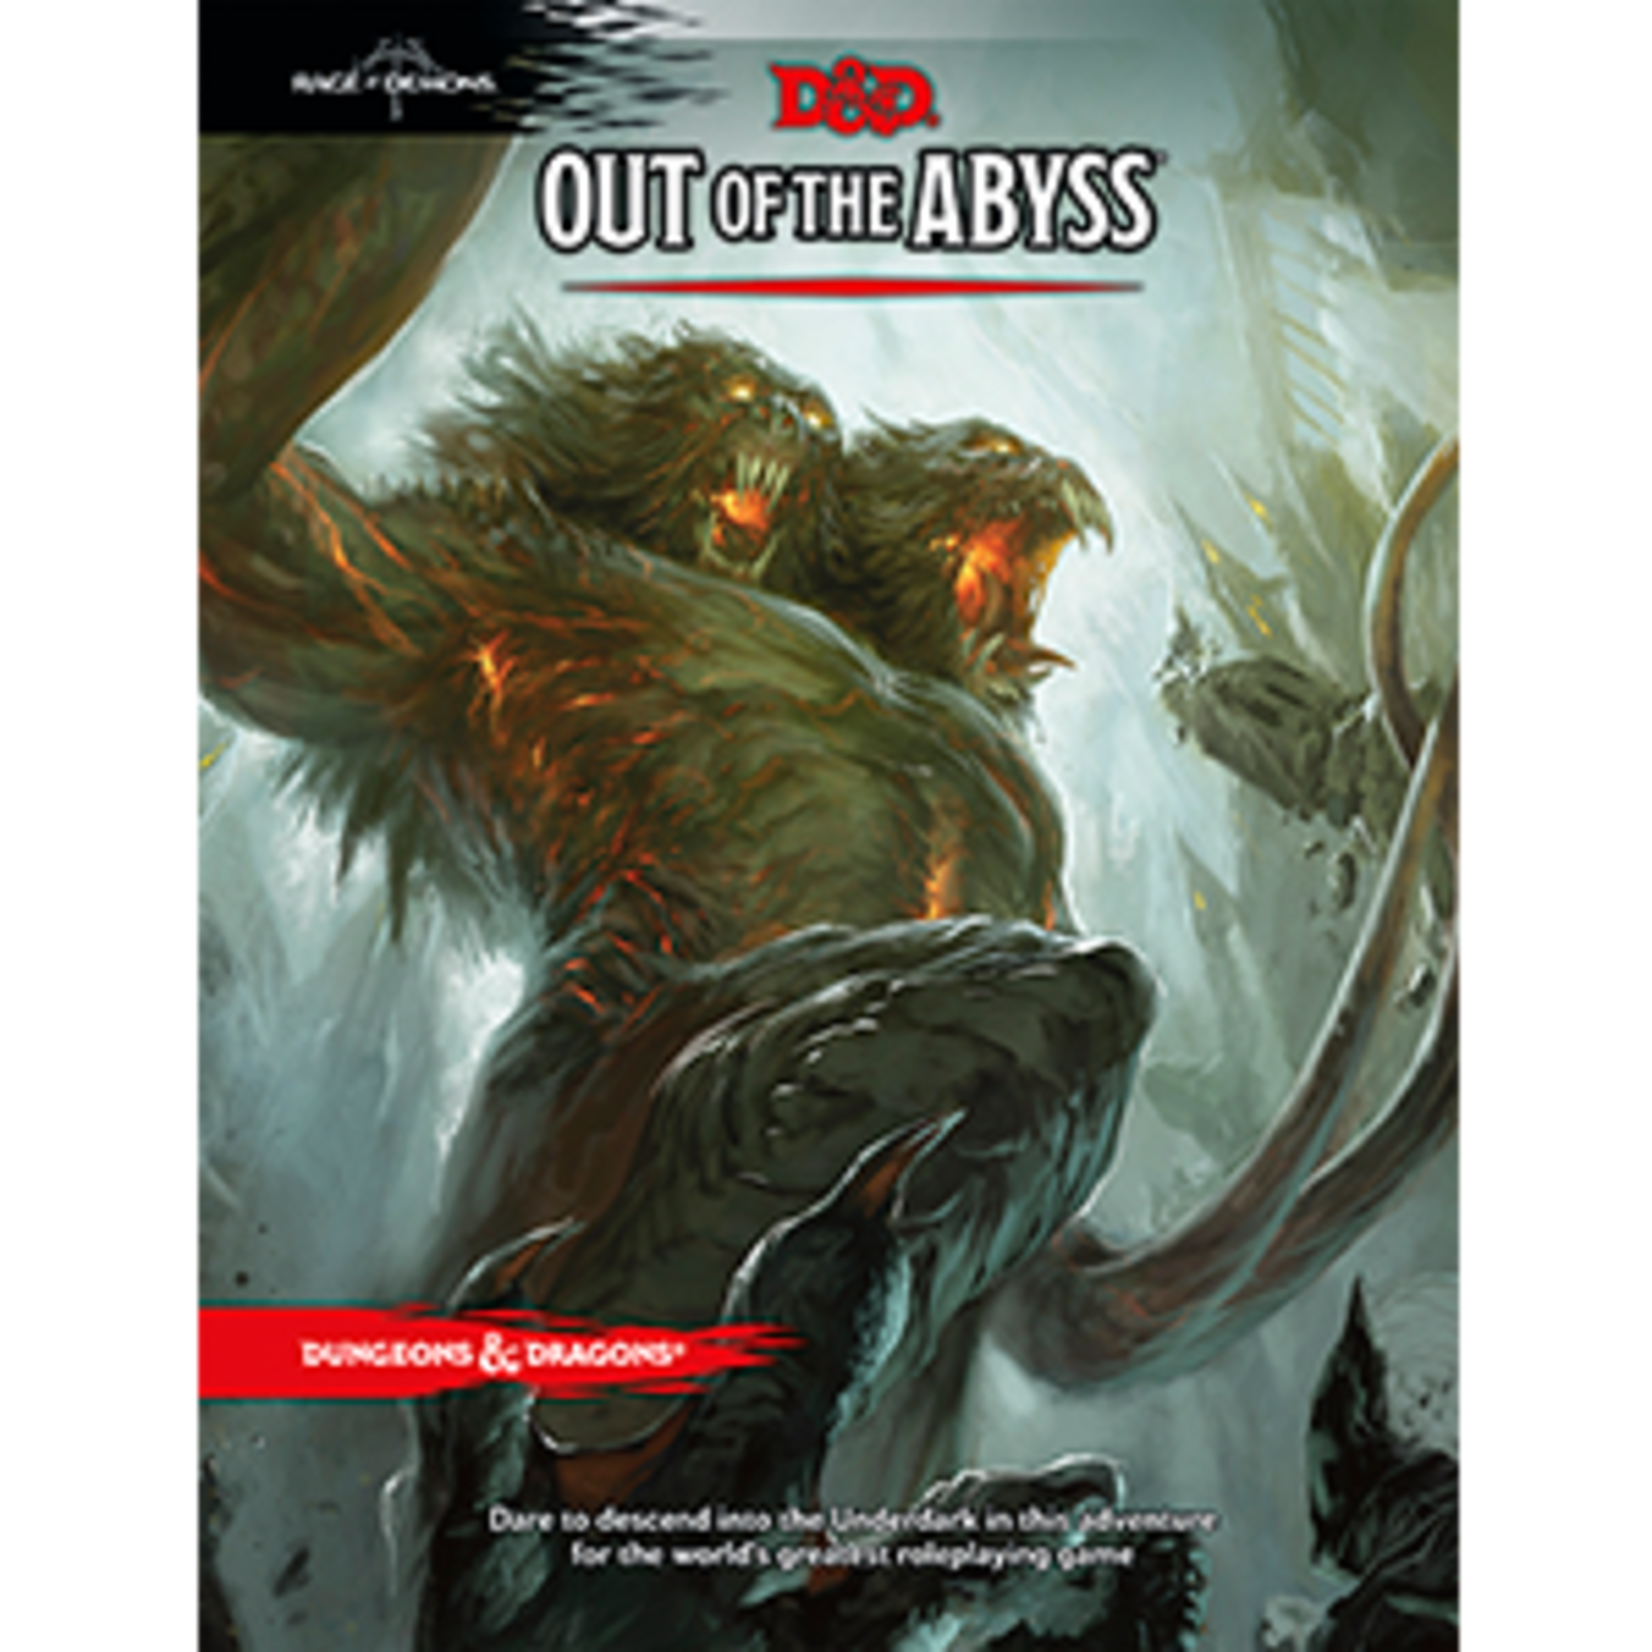 Wizards of the Coast Dungeons & Dragons RPG: Out of the Abyss Hard Cover